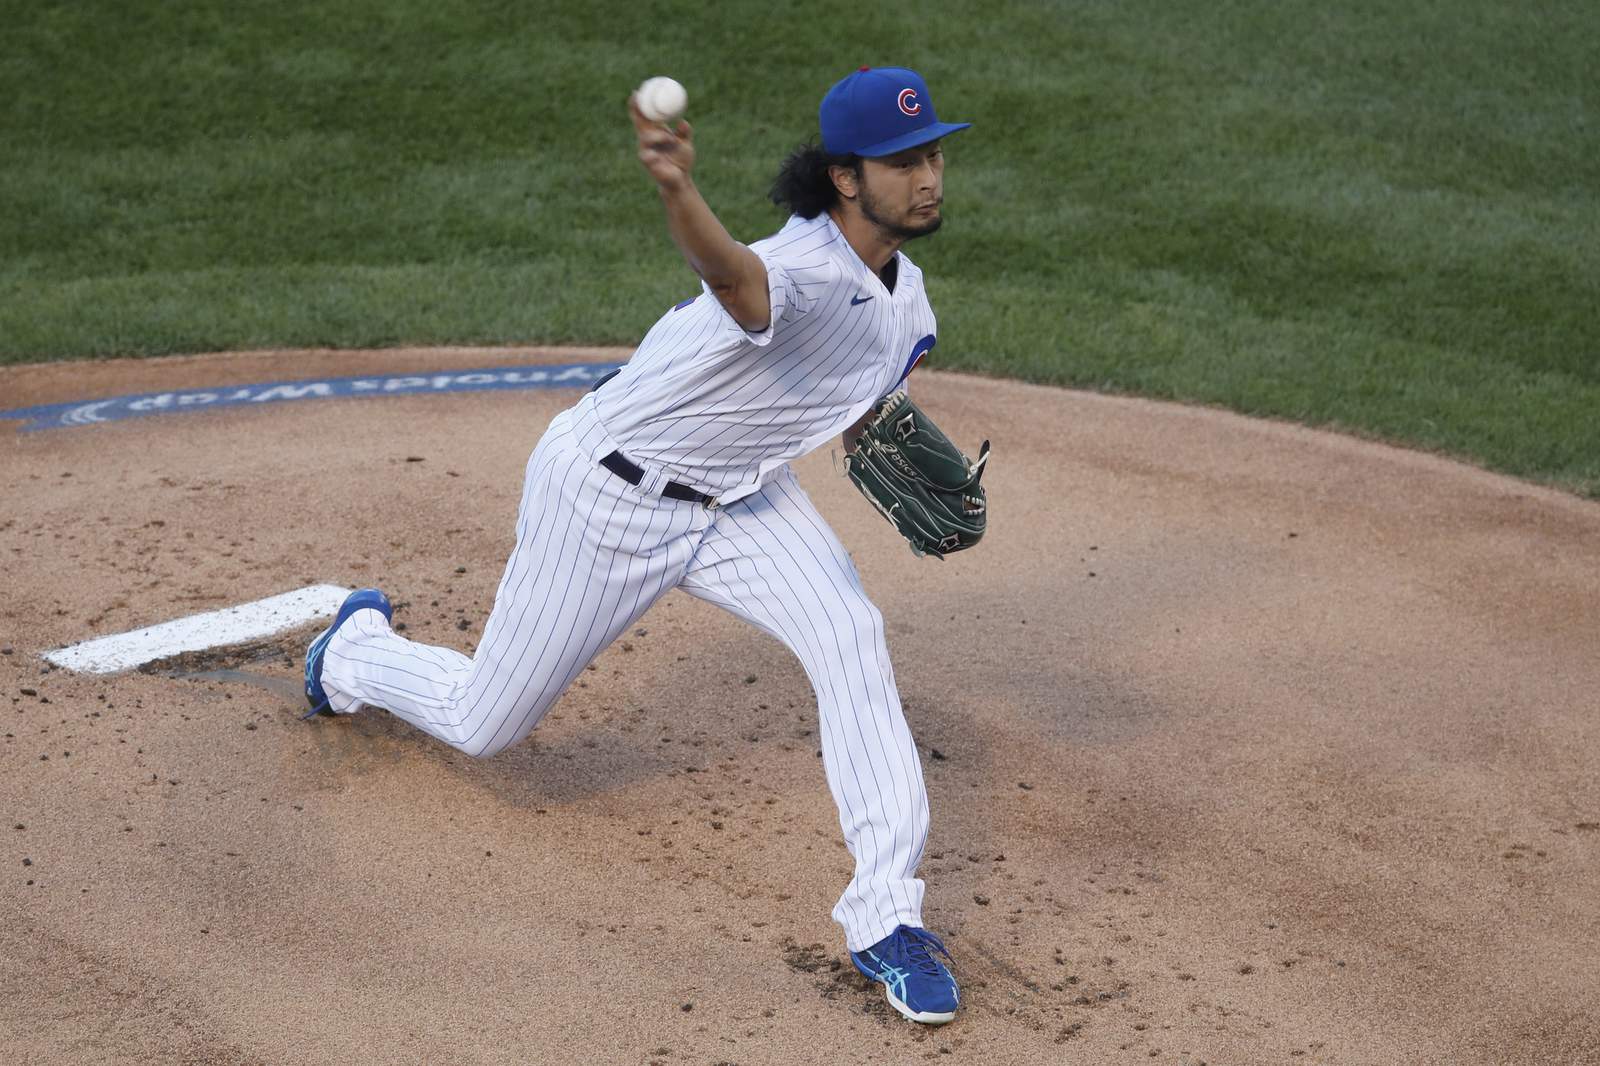 Darvish takes no-hitter into 7th, Cubs beat Brewers 4-2